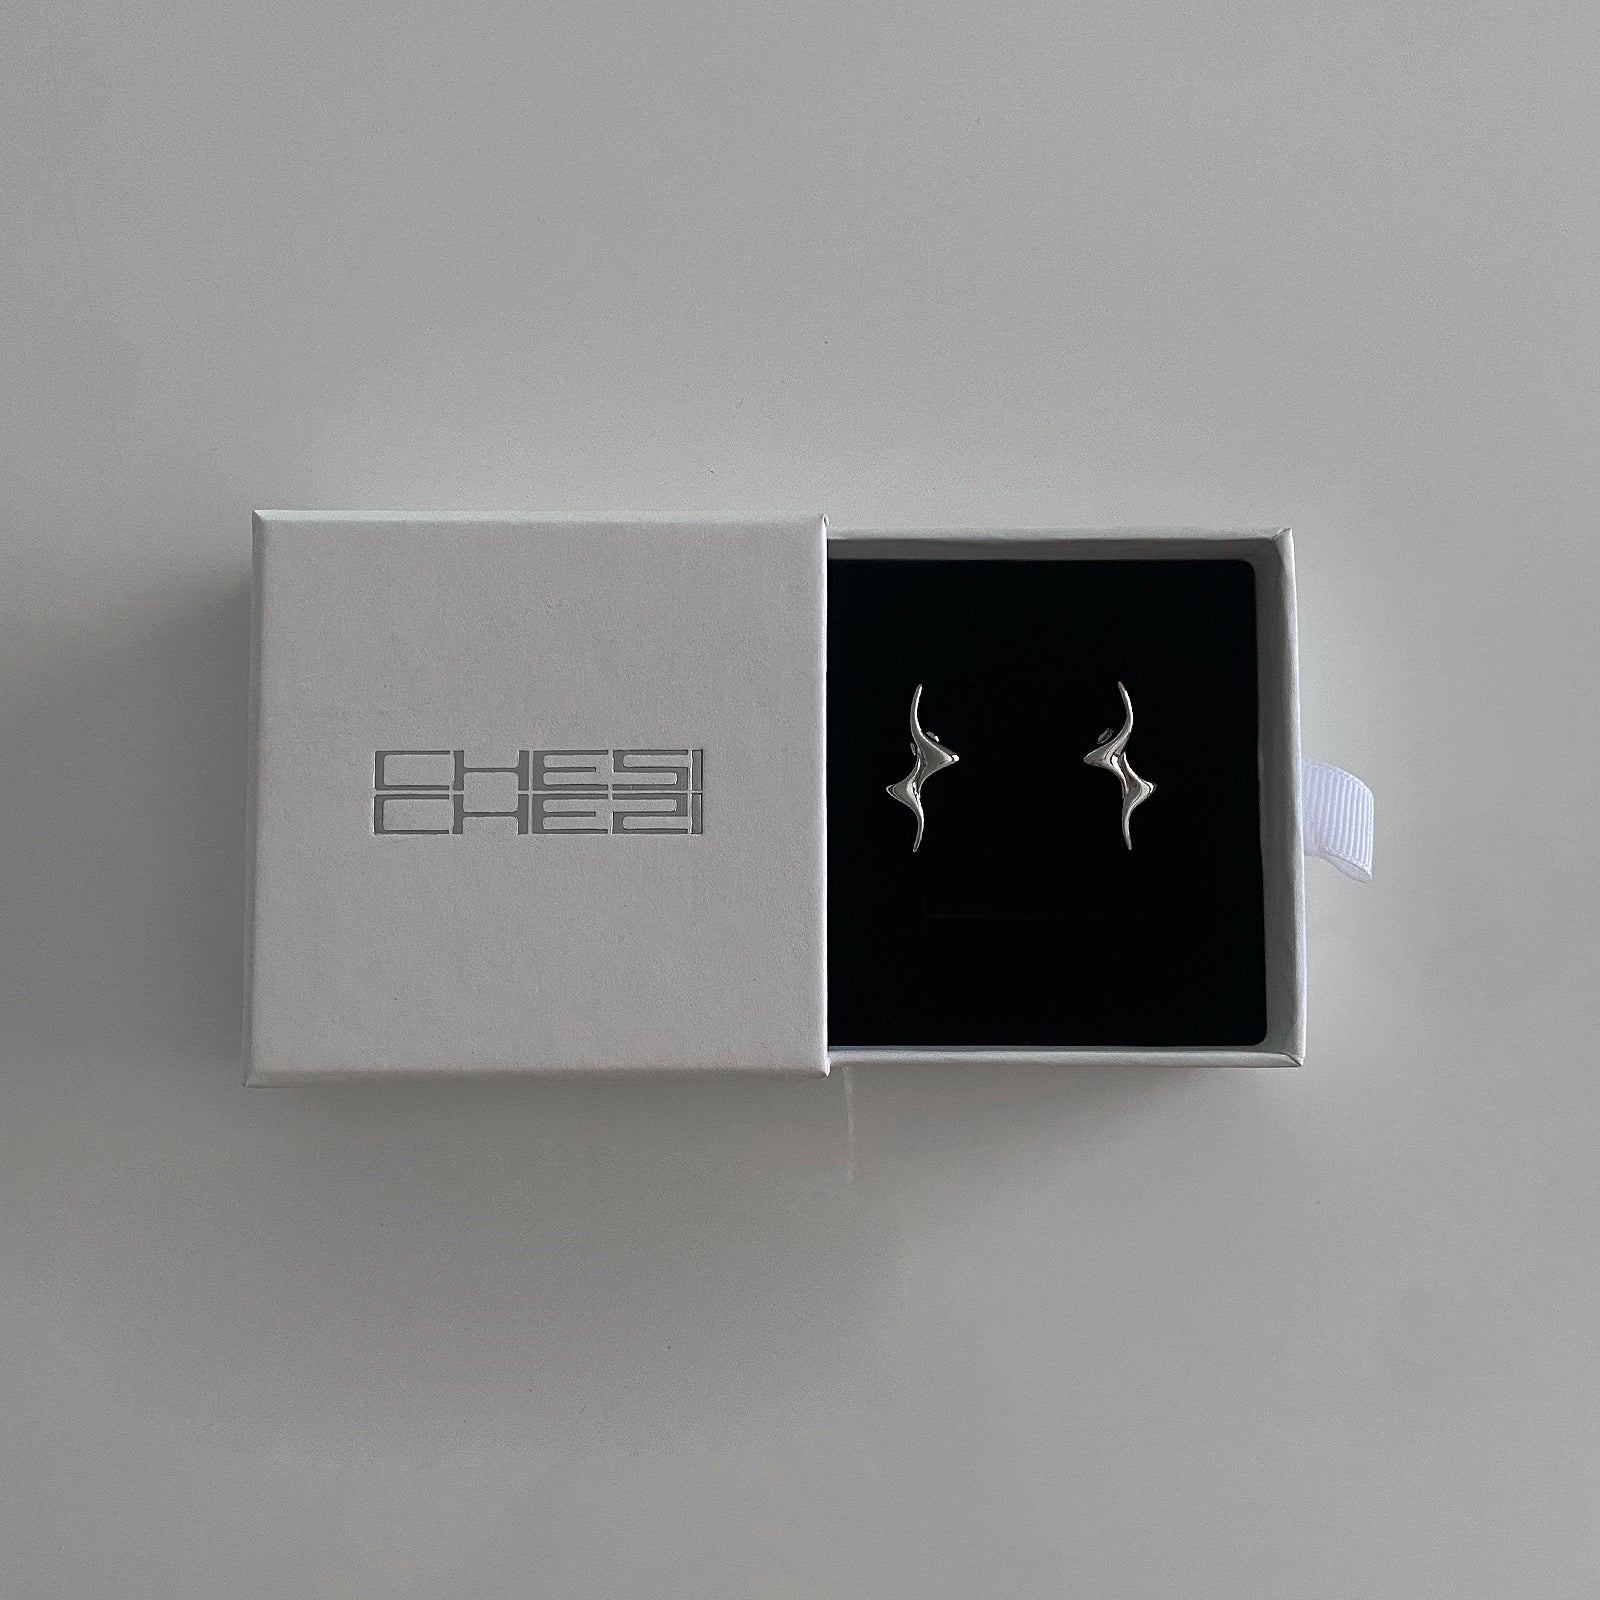 These cool Swirly Bolt Studs are shown in our Chesi Gift Box. Has a swirly lightning bolt design made of 925 silver with rhodium plating for extra protection and strength.